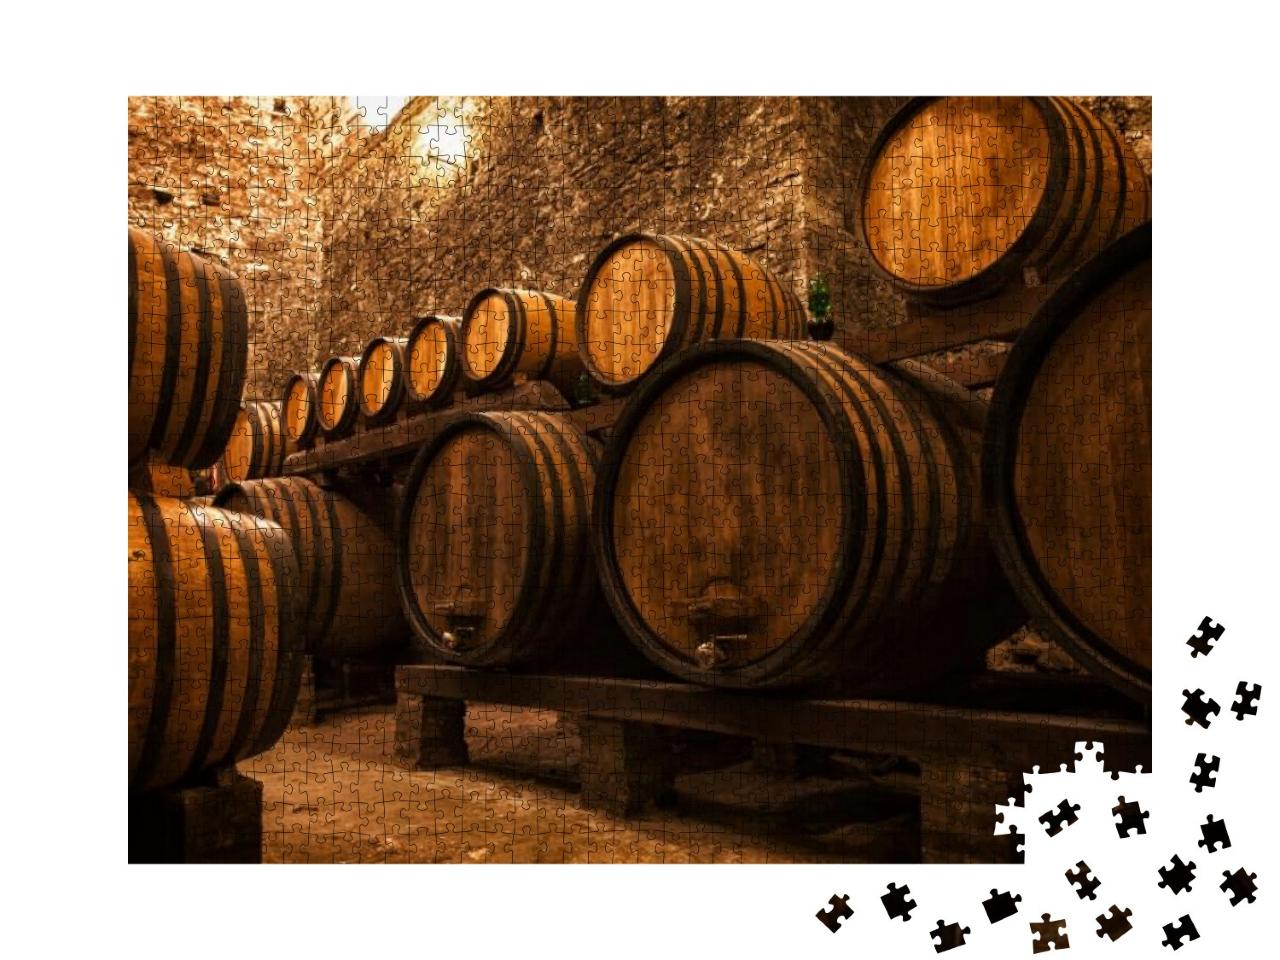 Cellar with Barrels for Storage of Wine, Italy... Jigsaw Puzzle with 1000 pieces